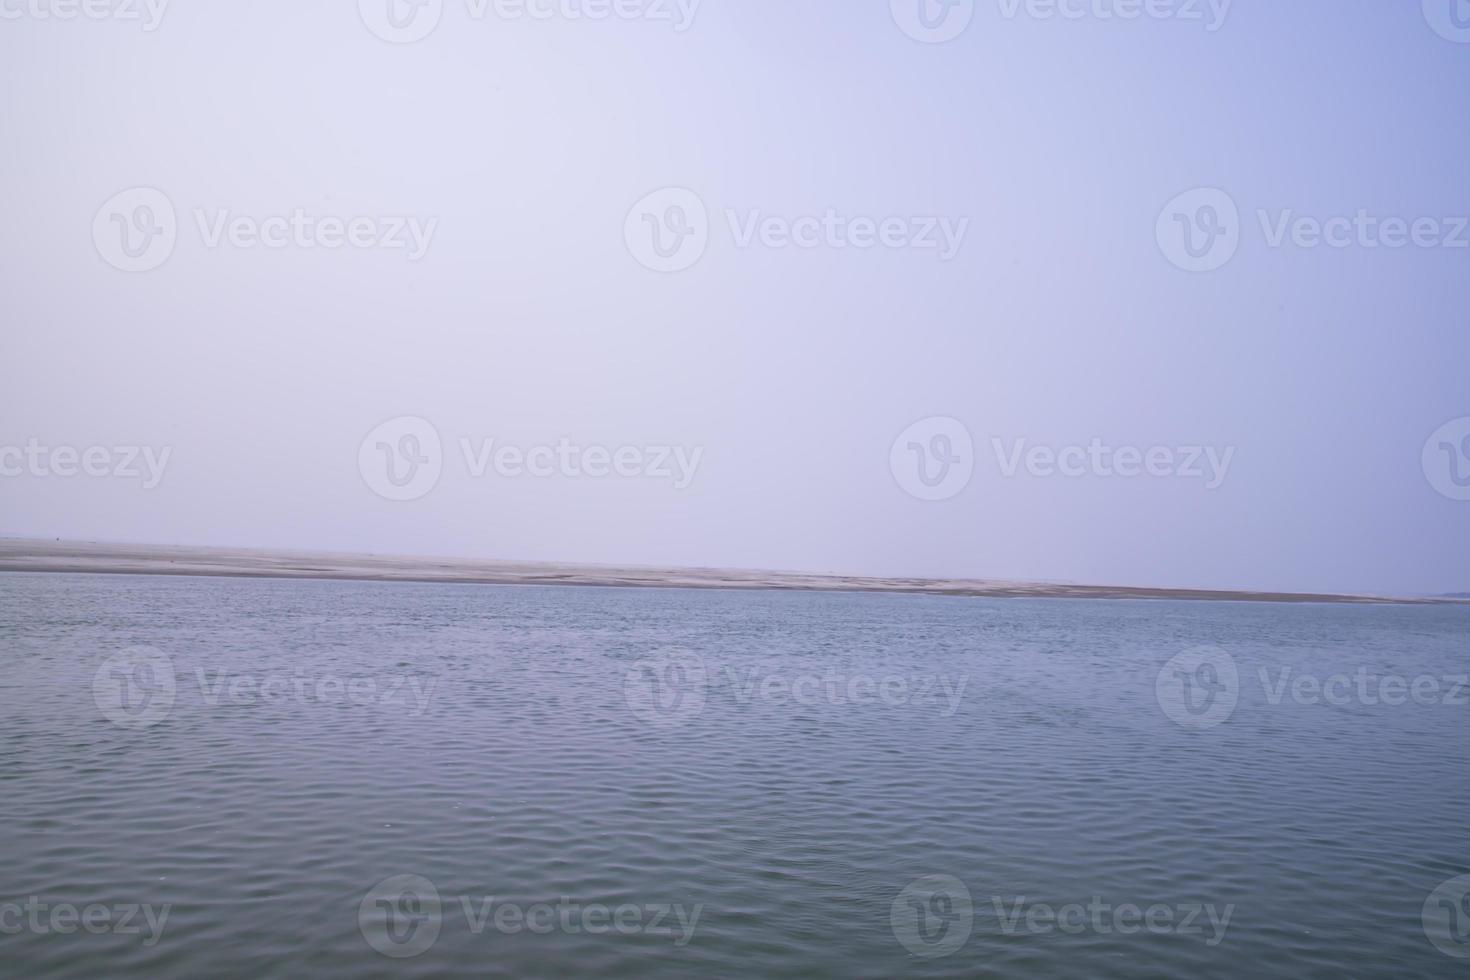 Padma River Bluewater and sand island with blue sky  beautiful  landscape view photo